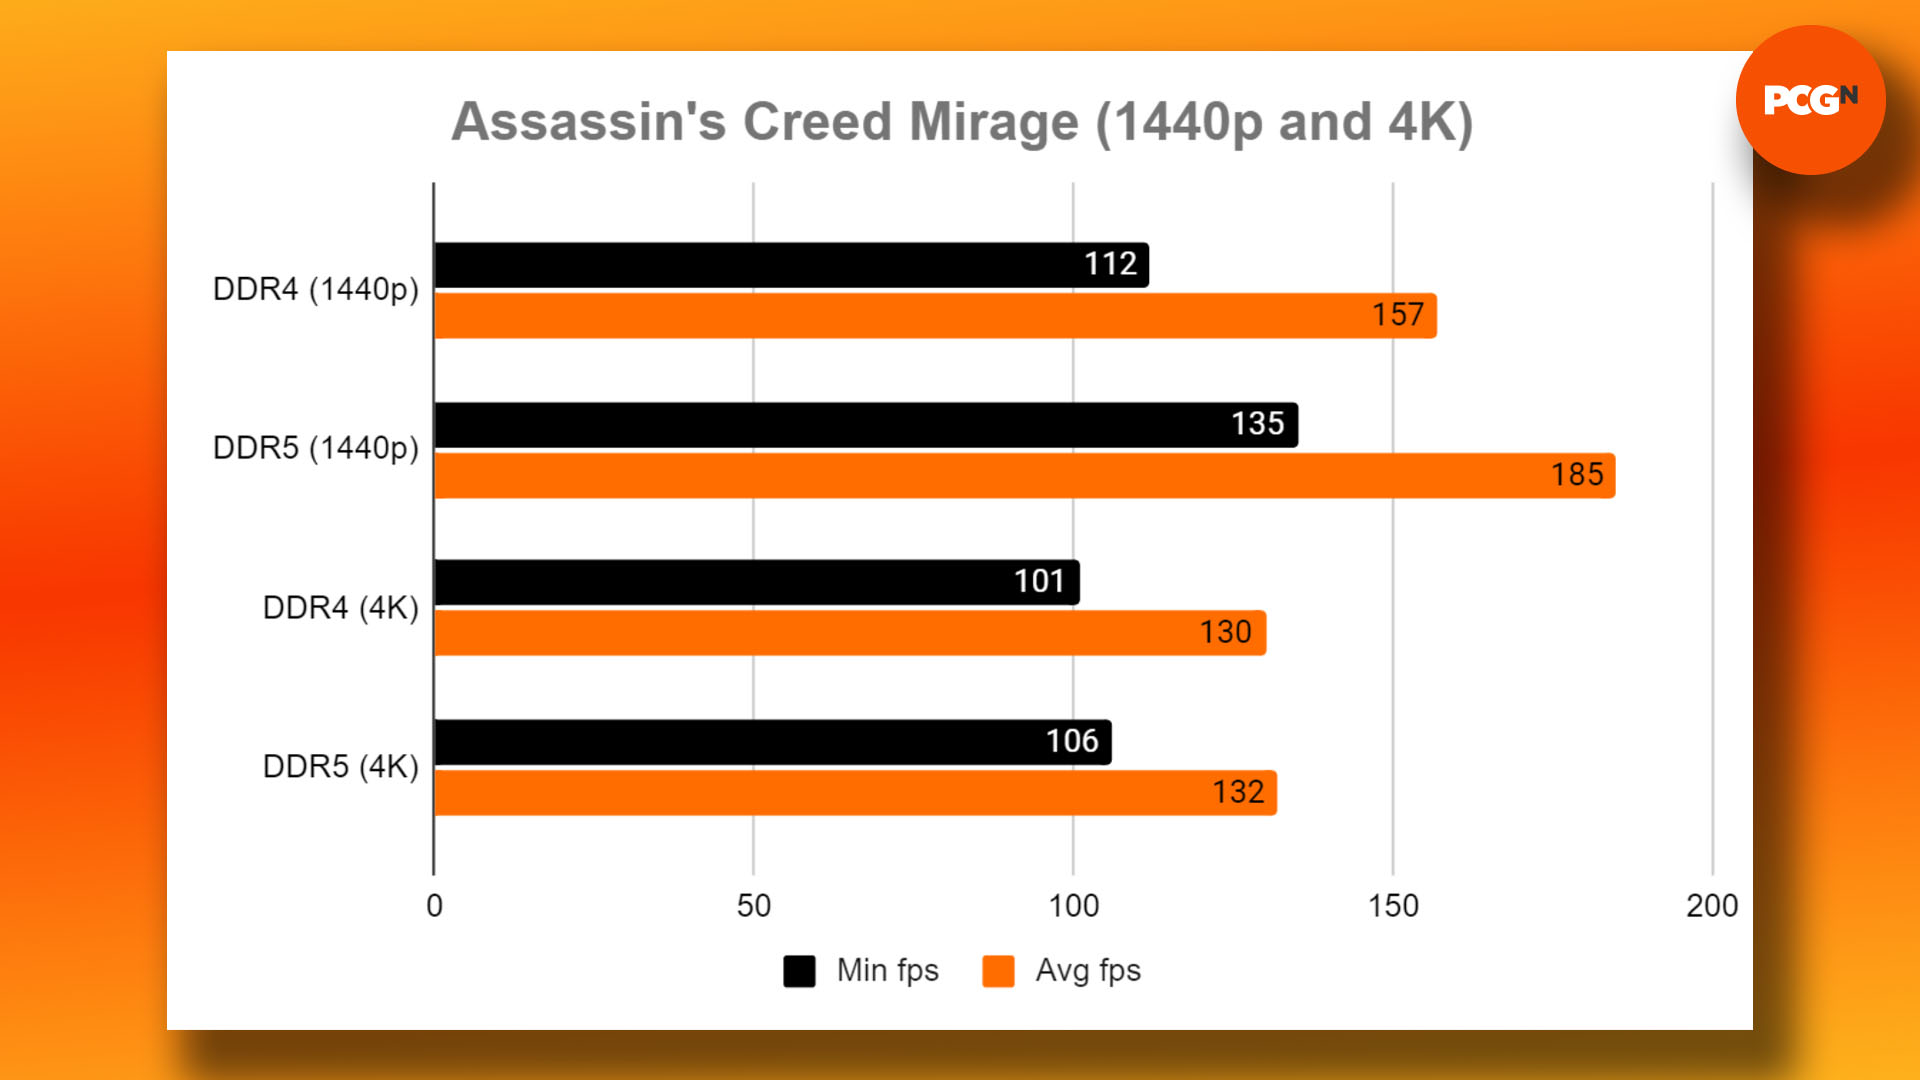 DDR4 vs DDR5 - which RAM to buy for gaming: Assassin's Creed Mirage 1440p and 4K benchmark results graph